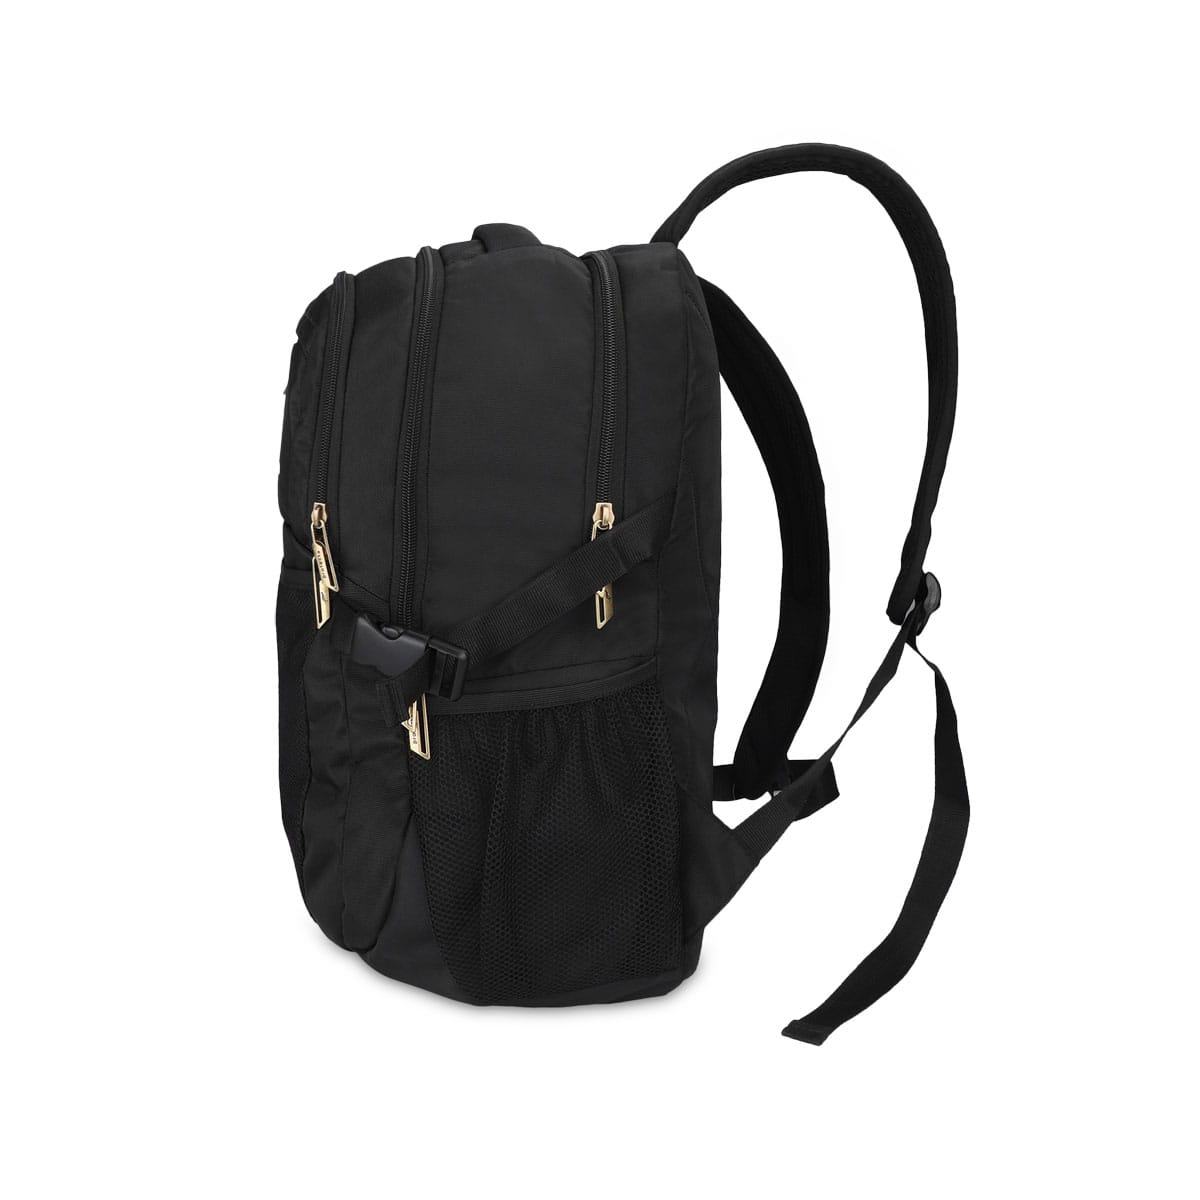 Black | Protecta Enigma Laptop Backpack-2